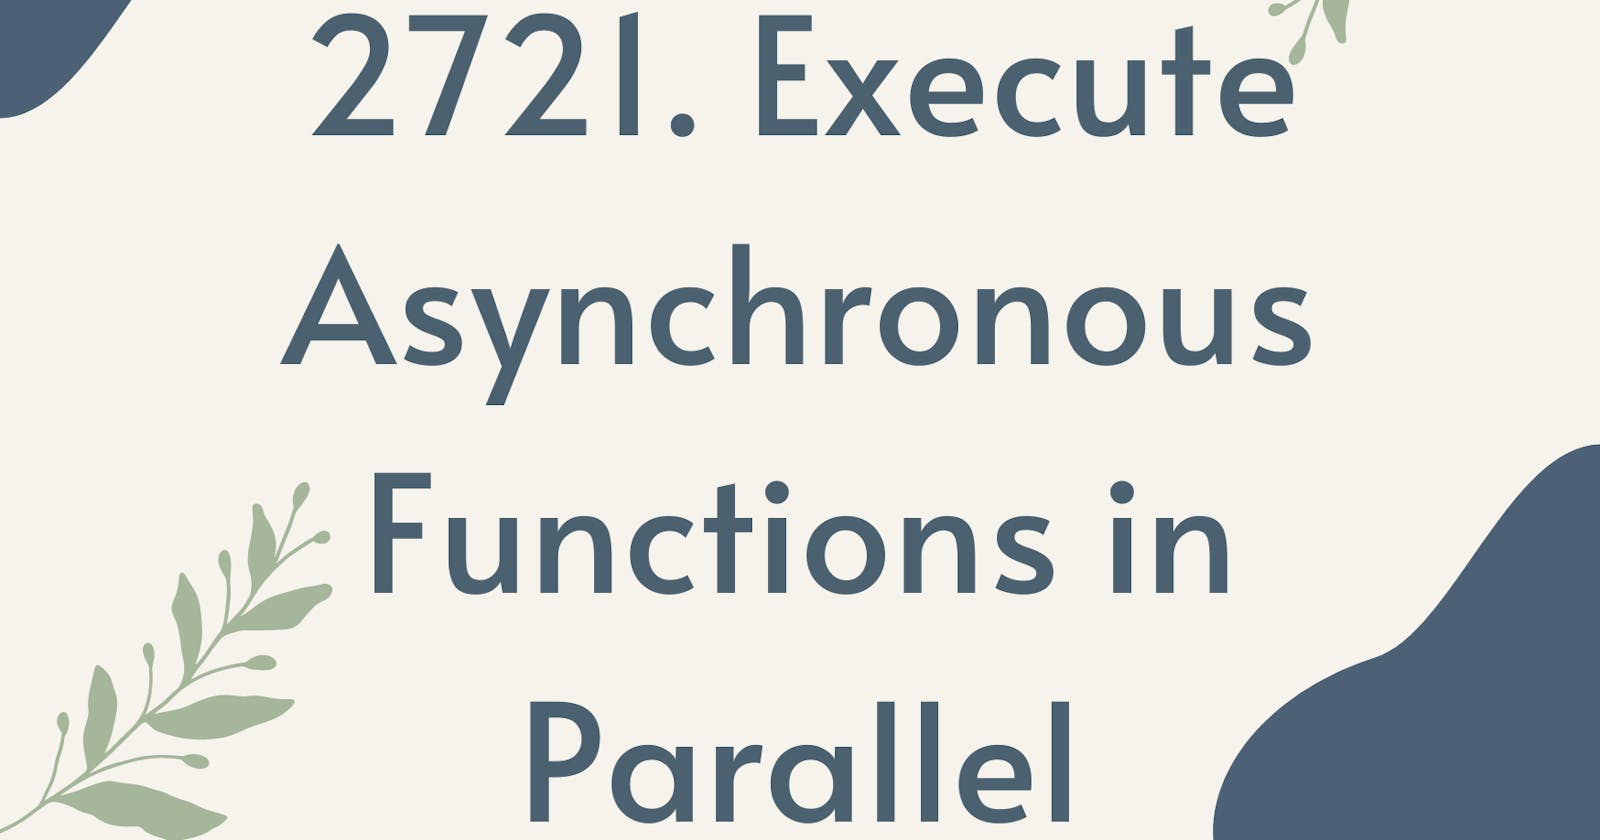 2721. Execute Asynchronous Functions in Parallel